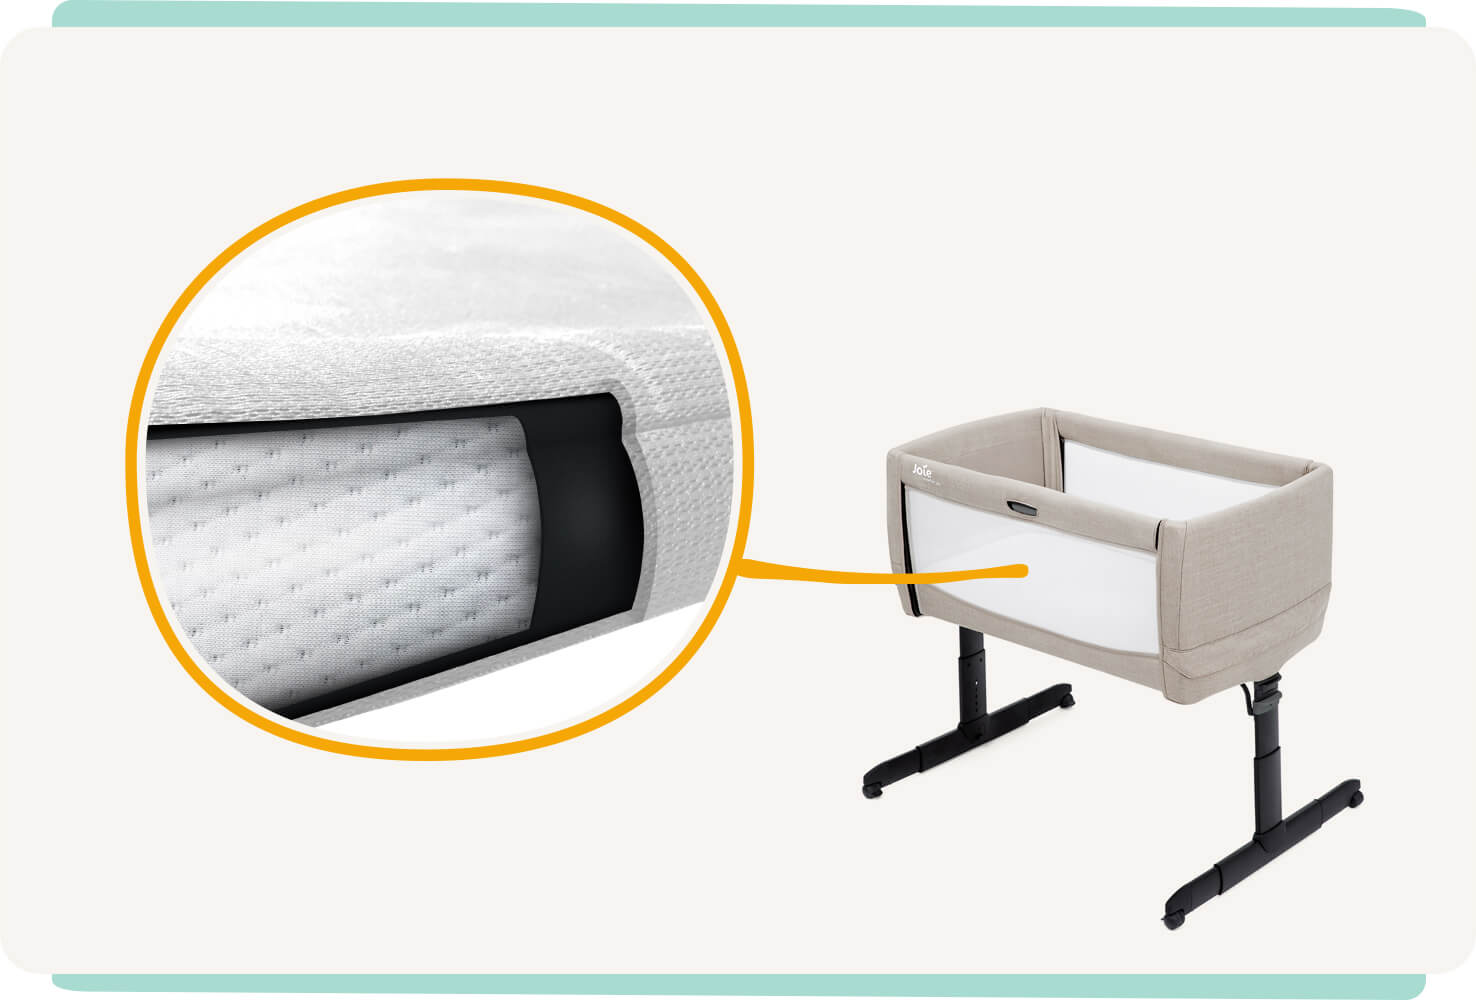 Angled view of the Joie Roomie Go bedside crib with an inset showing the mesh interior of the crib mattress 